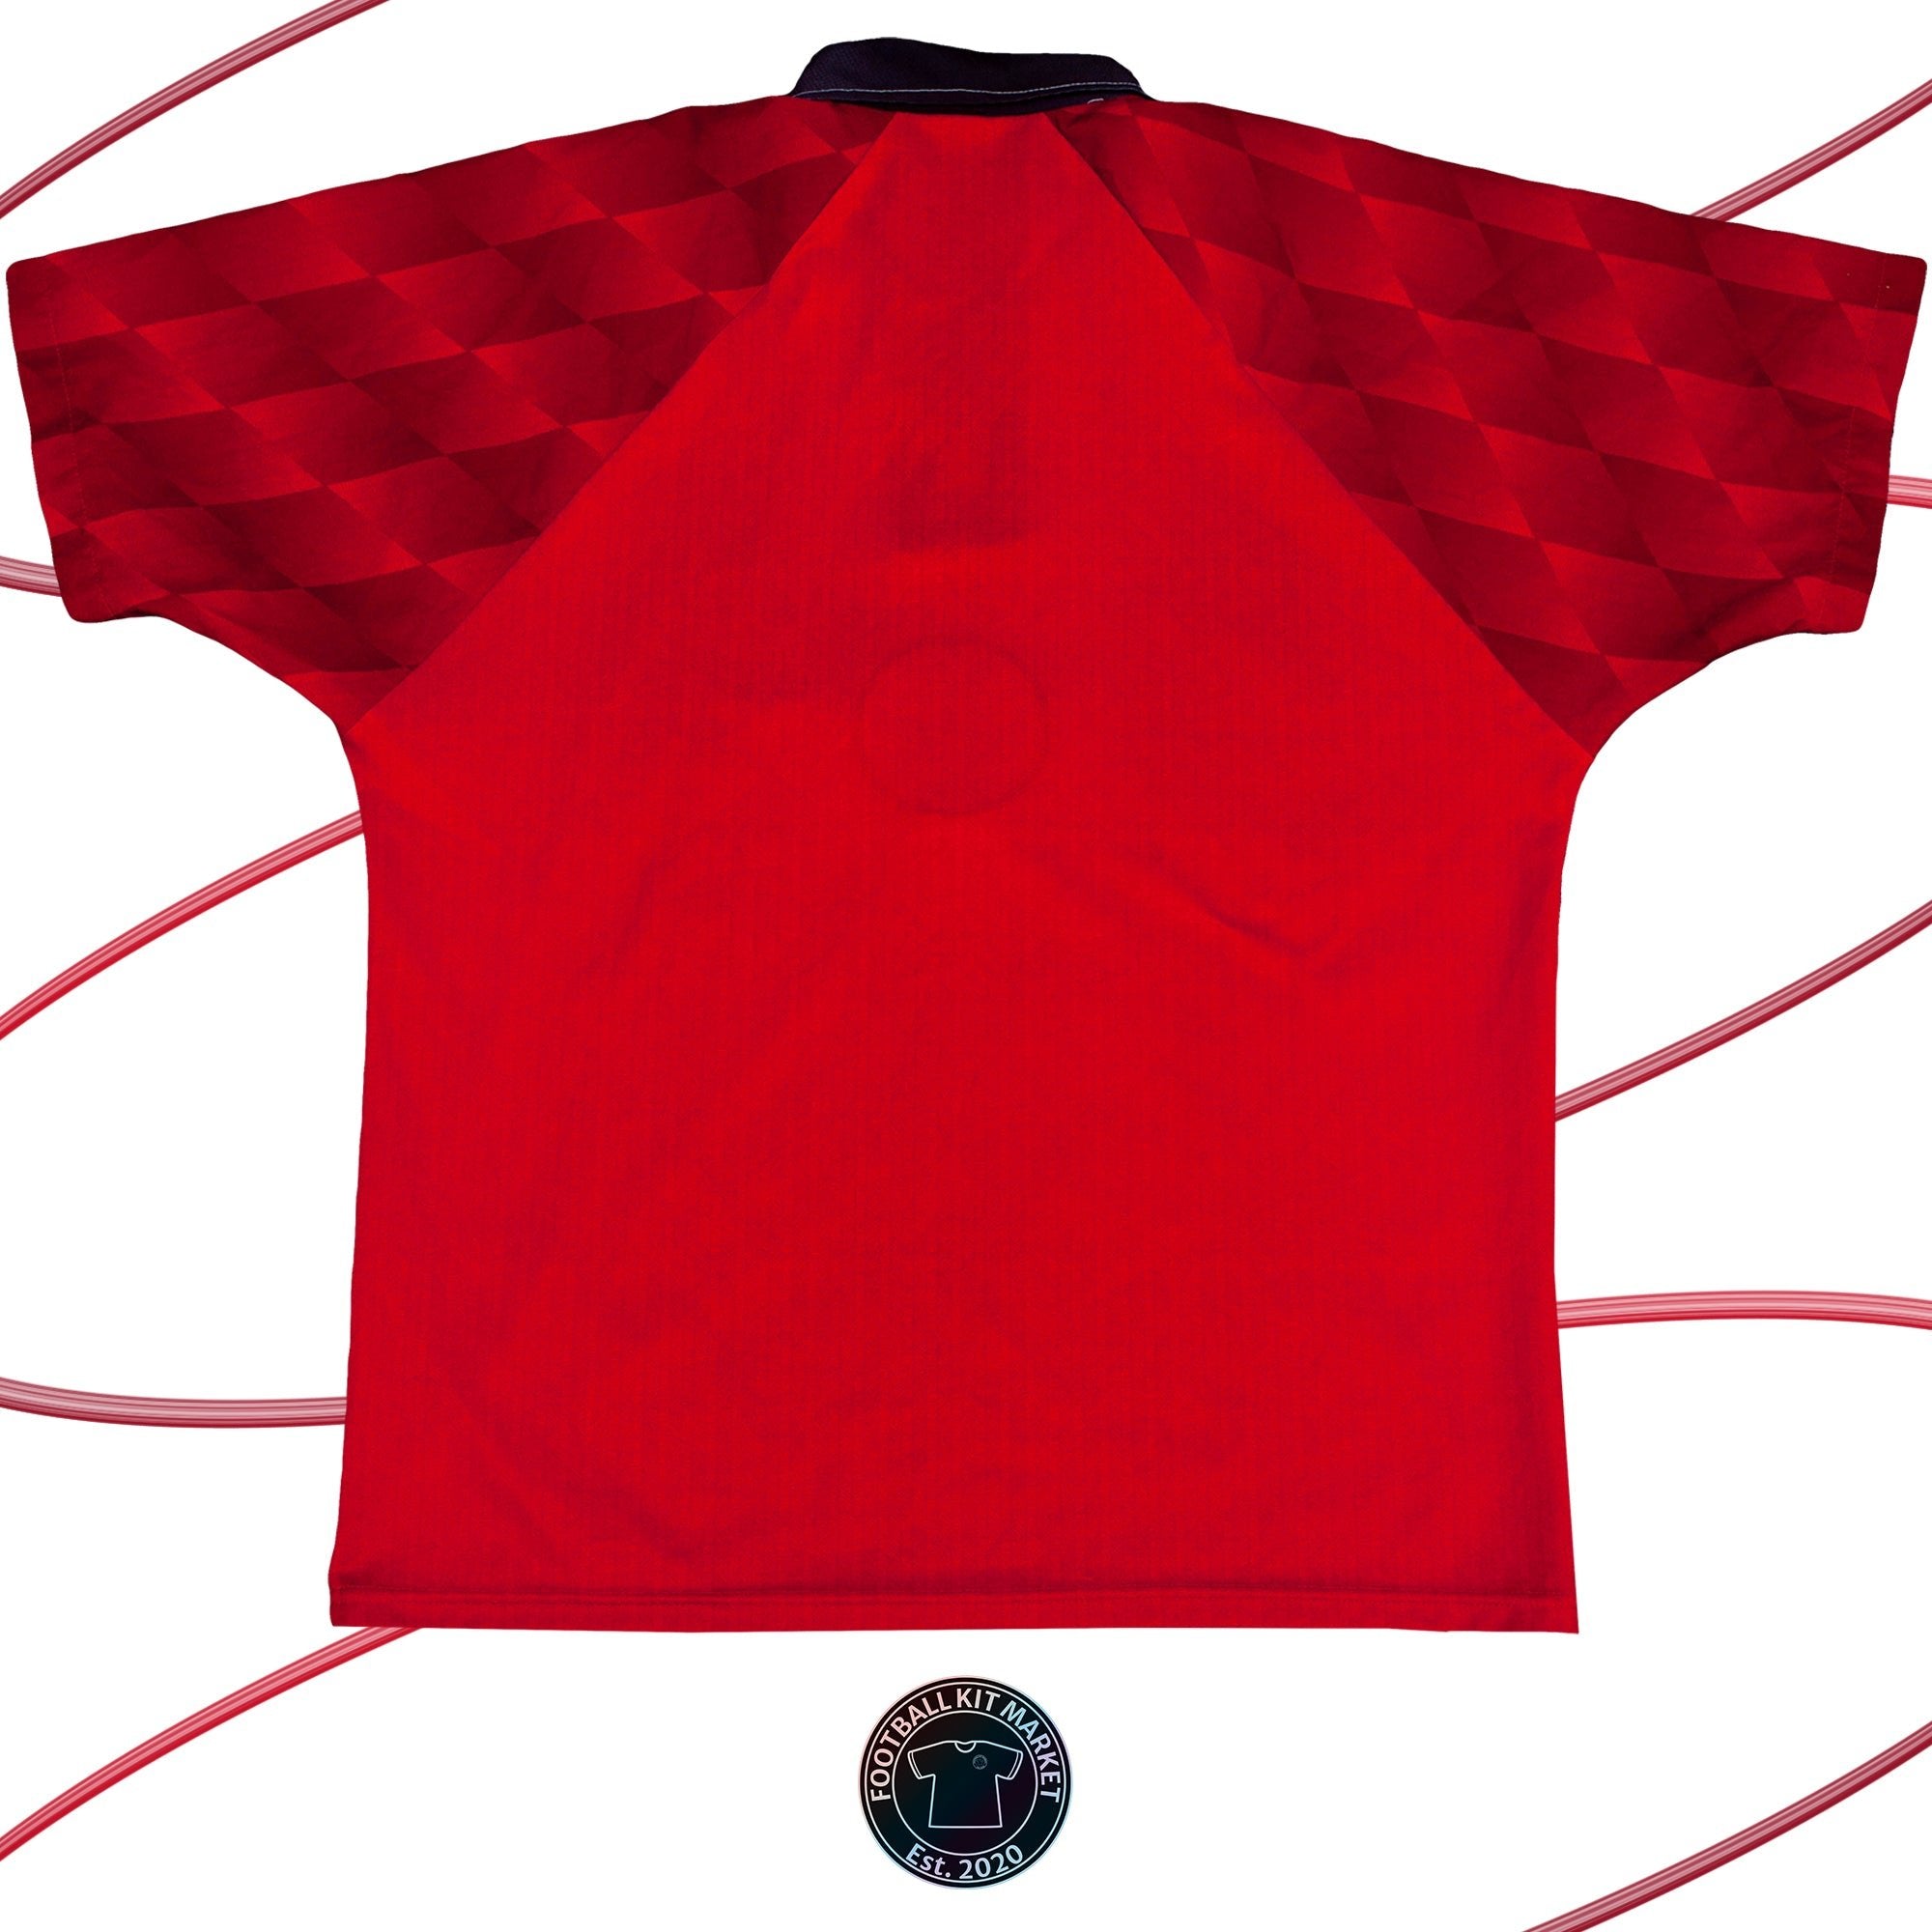 Genuine MANCHESTER UNITED Home Shirt (1996-1998) - UMBRO (M) - Product Image from Football Kit Market